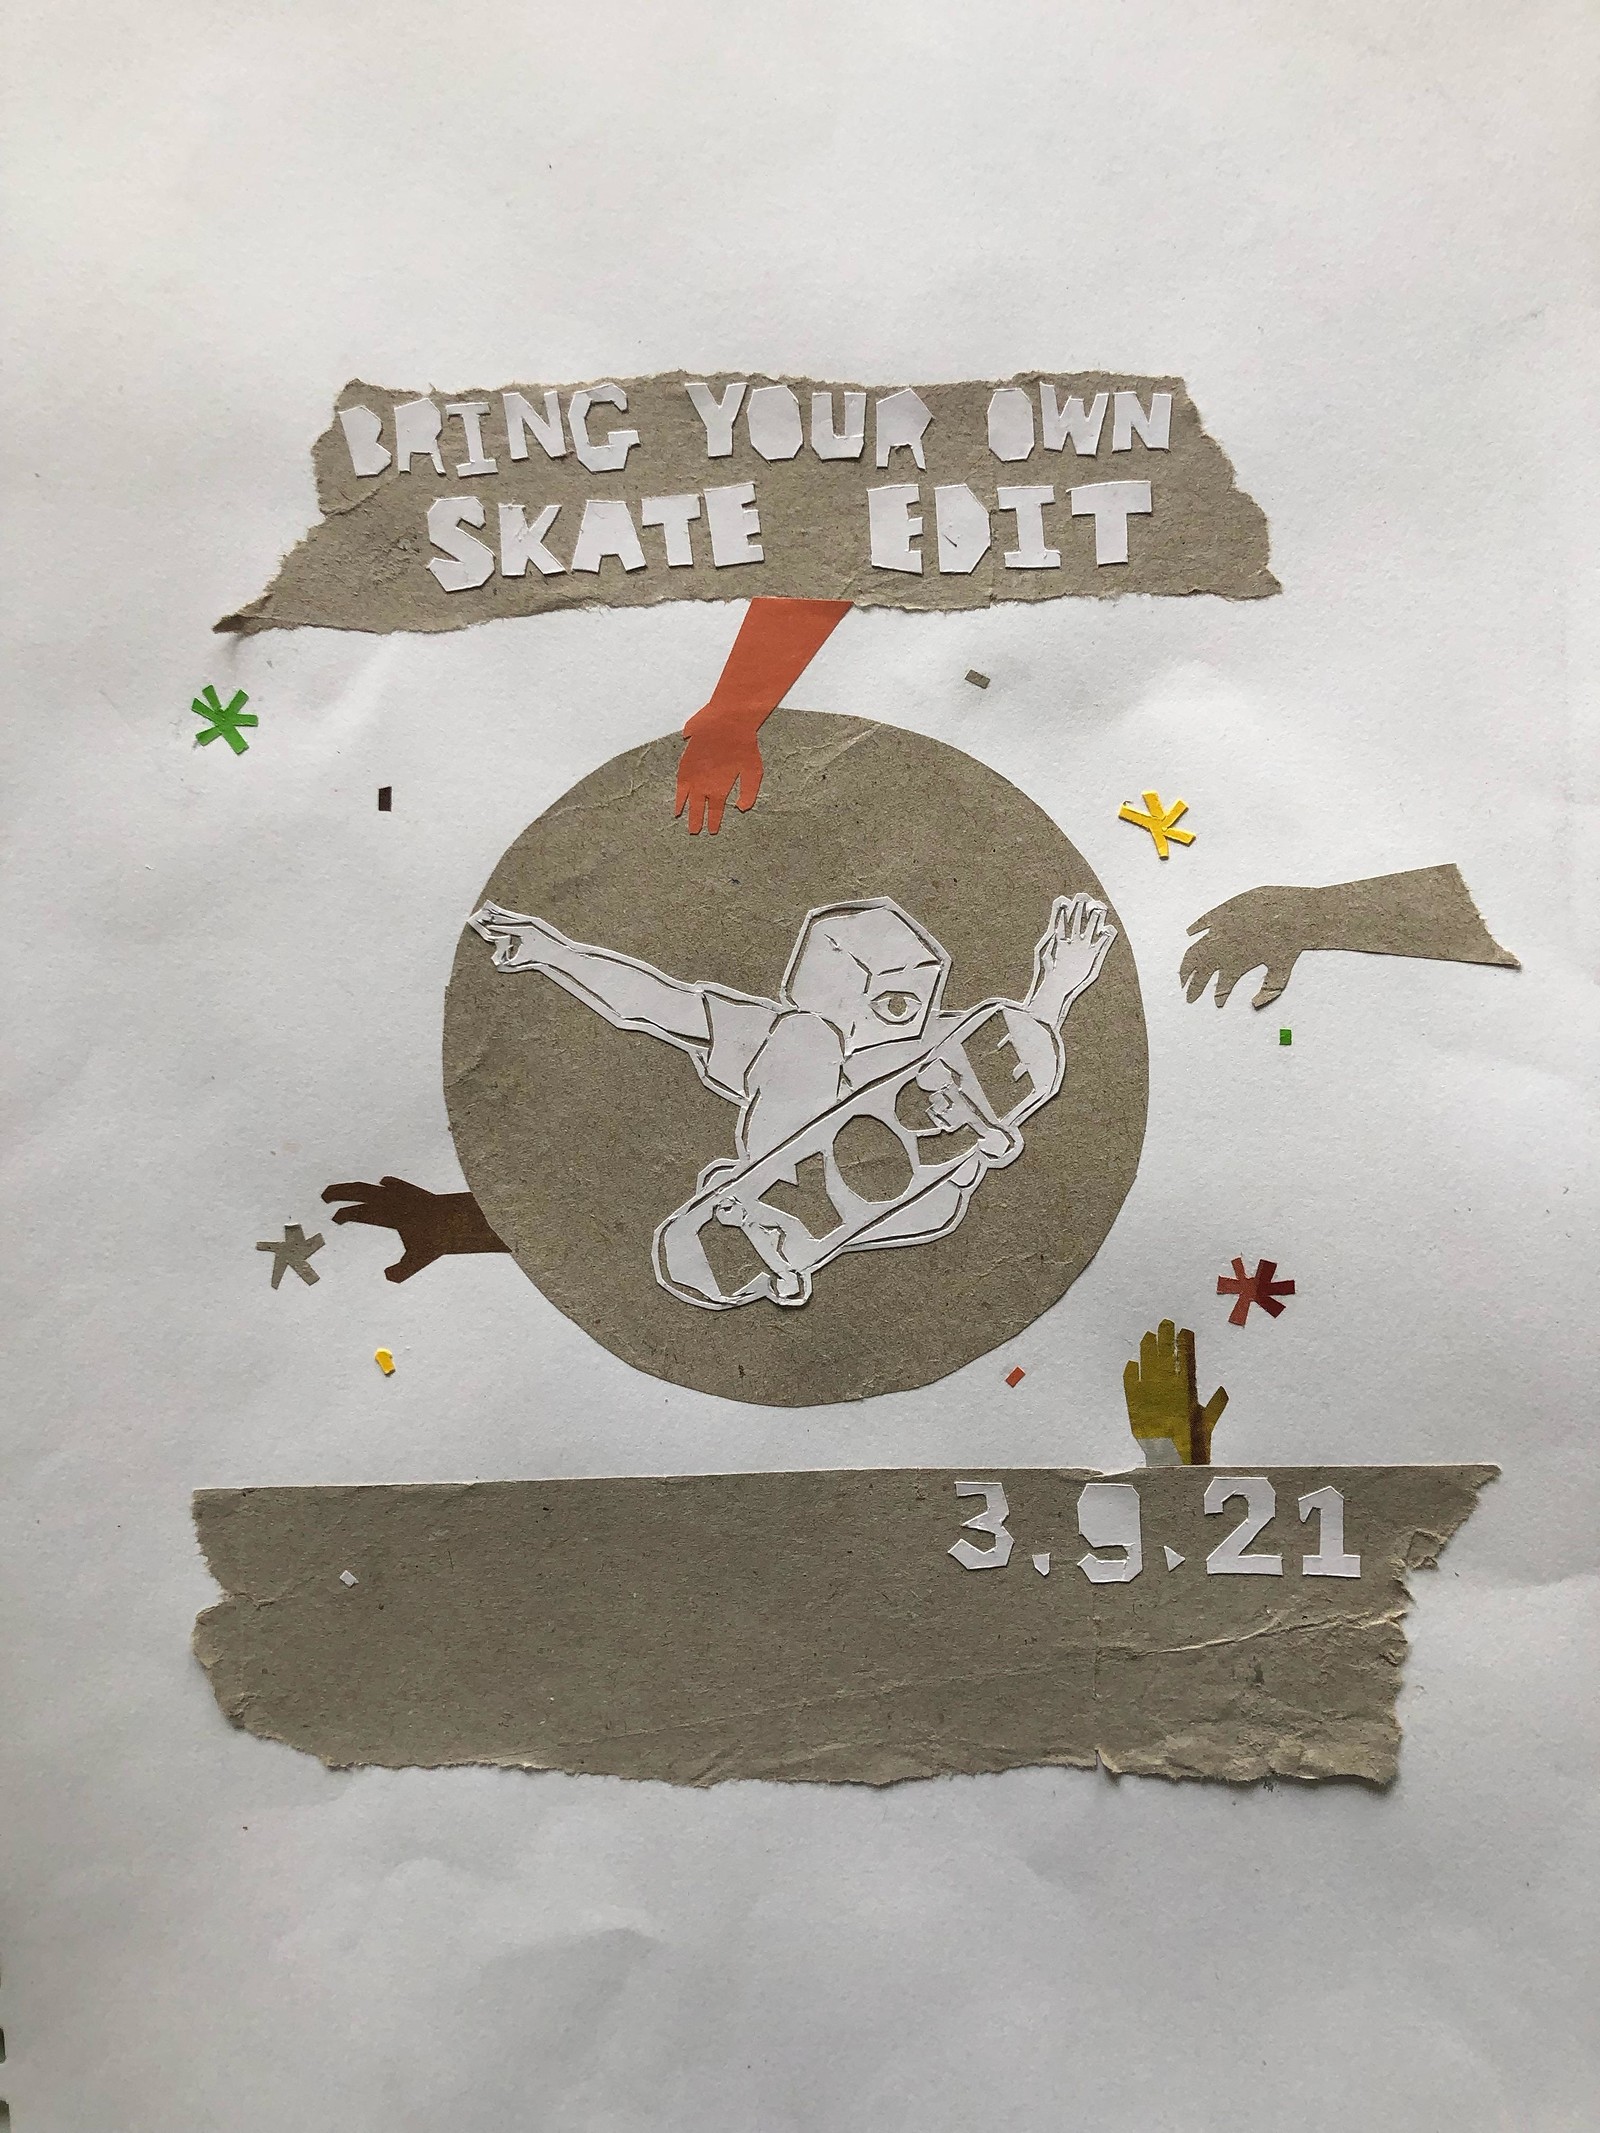 Bring-Your-Own-Skate-Edit at The Cube